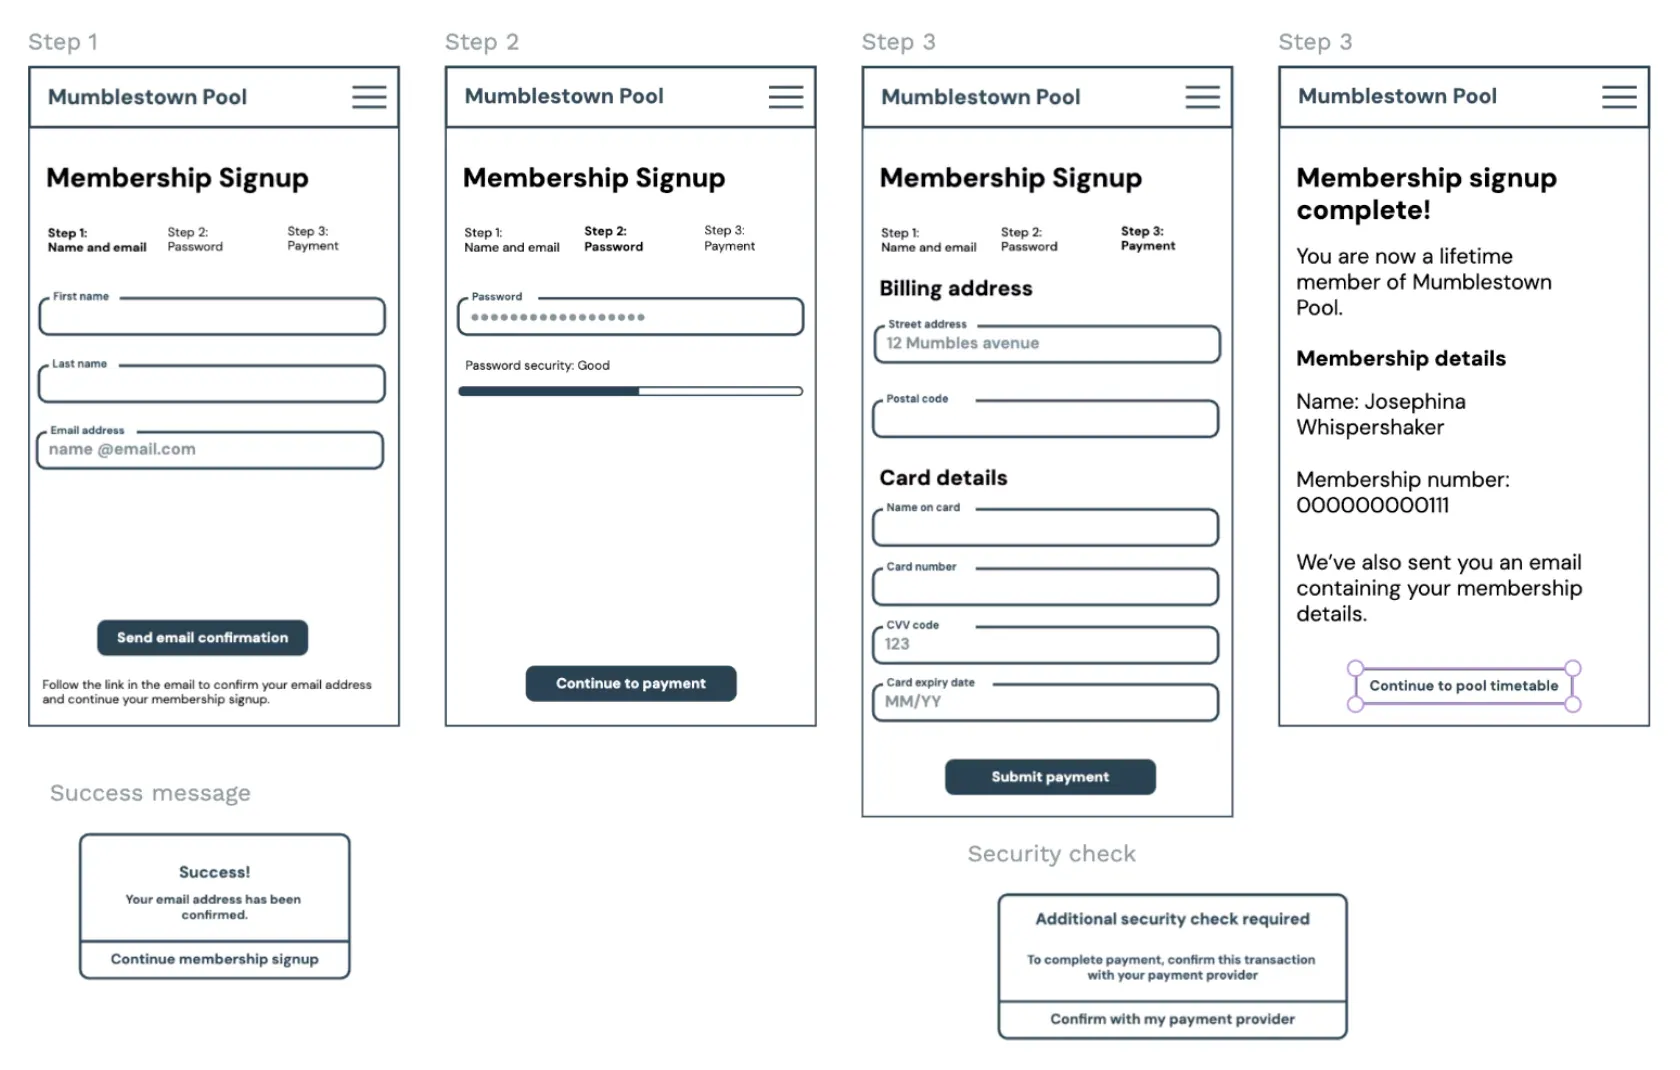 Four wireframes of a membership sign up form, each representing a step in the process.